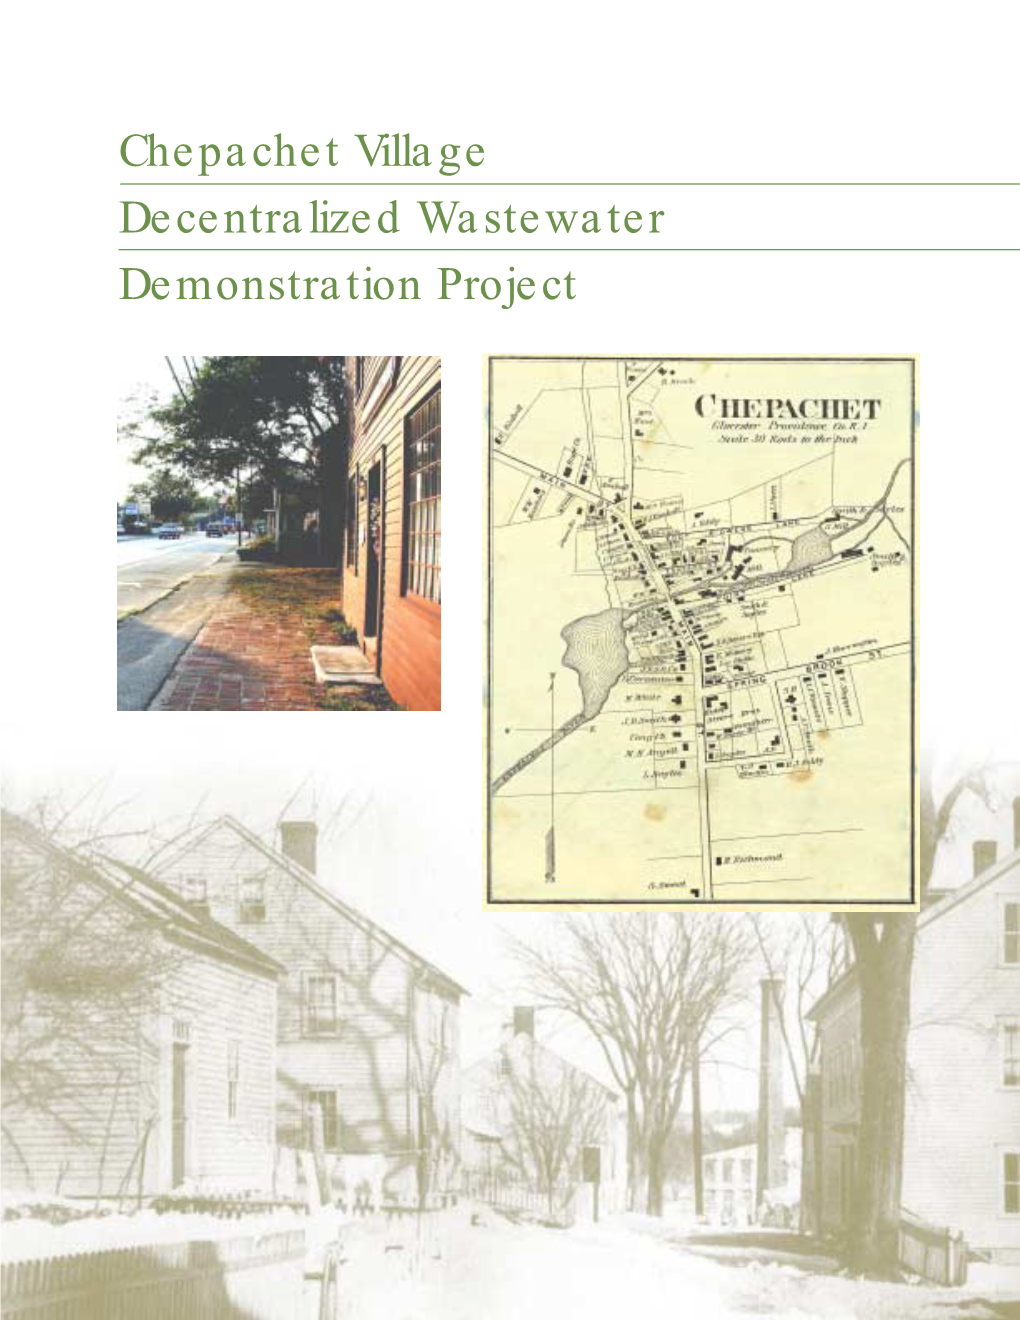 The Chepachet Village Decentralized Wastewater Demonstration Project